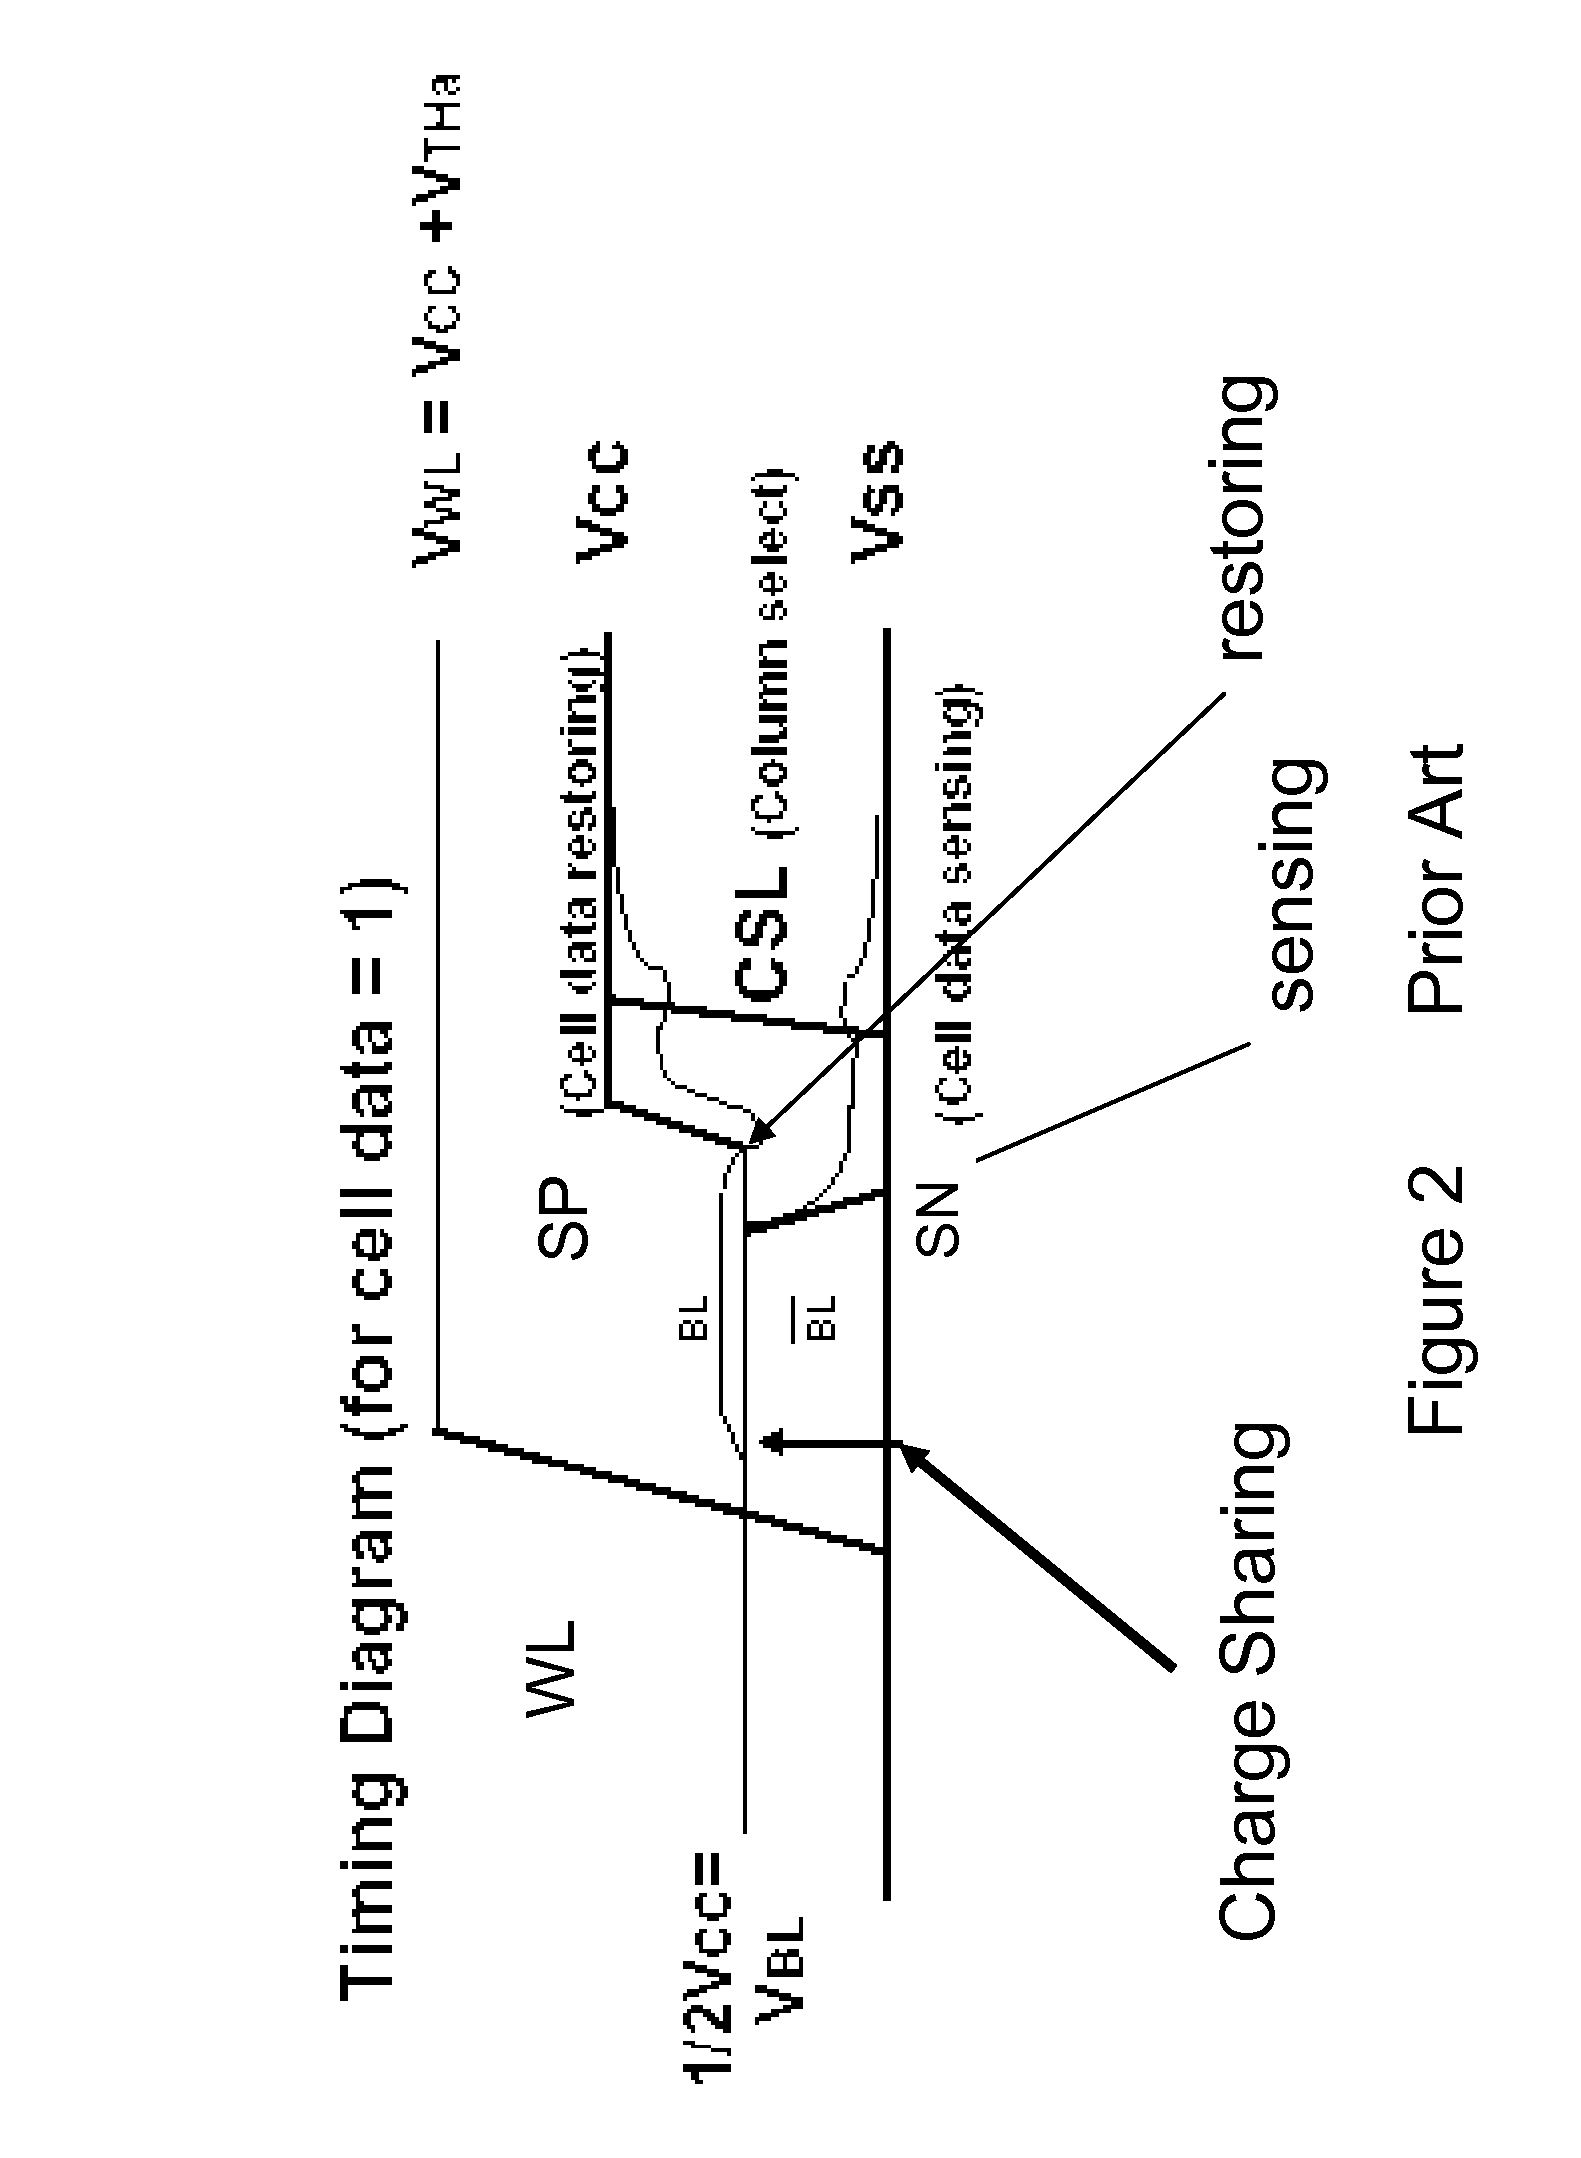 Circuit for high speed dynamic memory